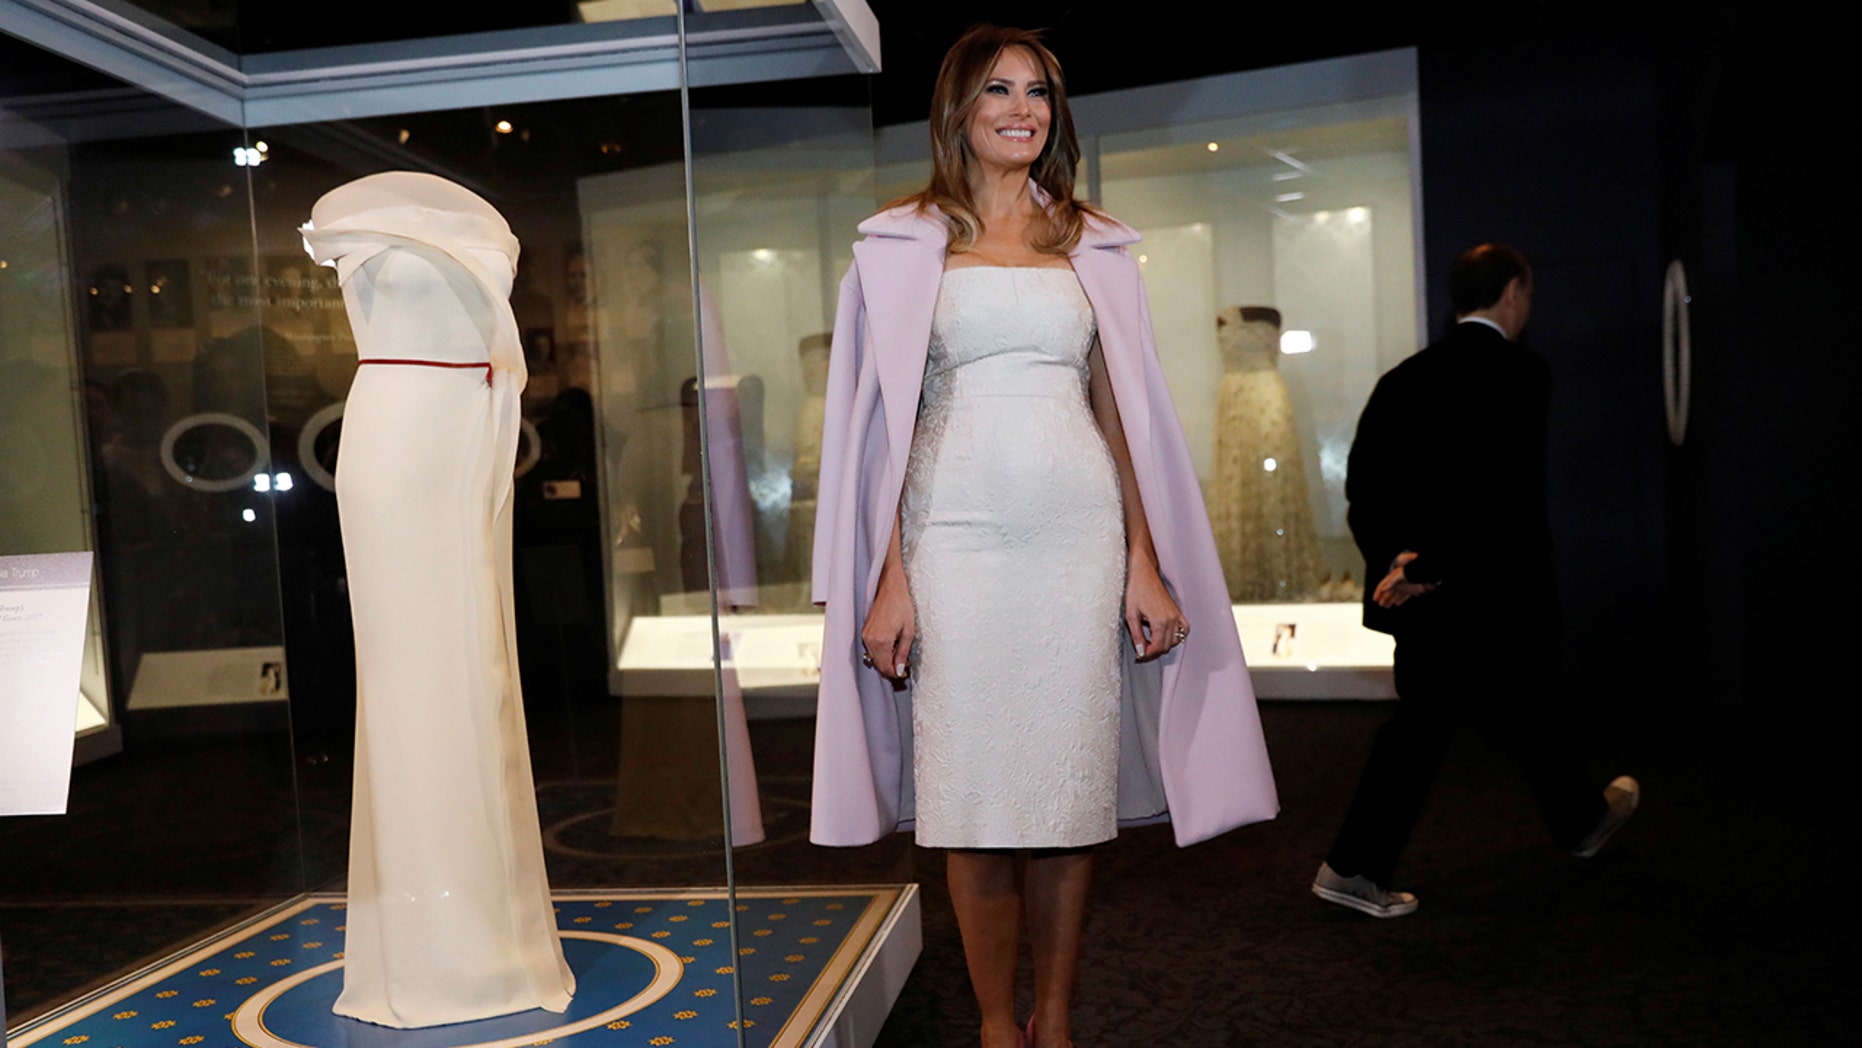 Melania Trump Continues To Protest Bullying While Wearing Pink Fox News 